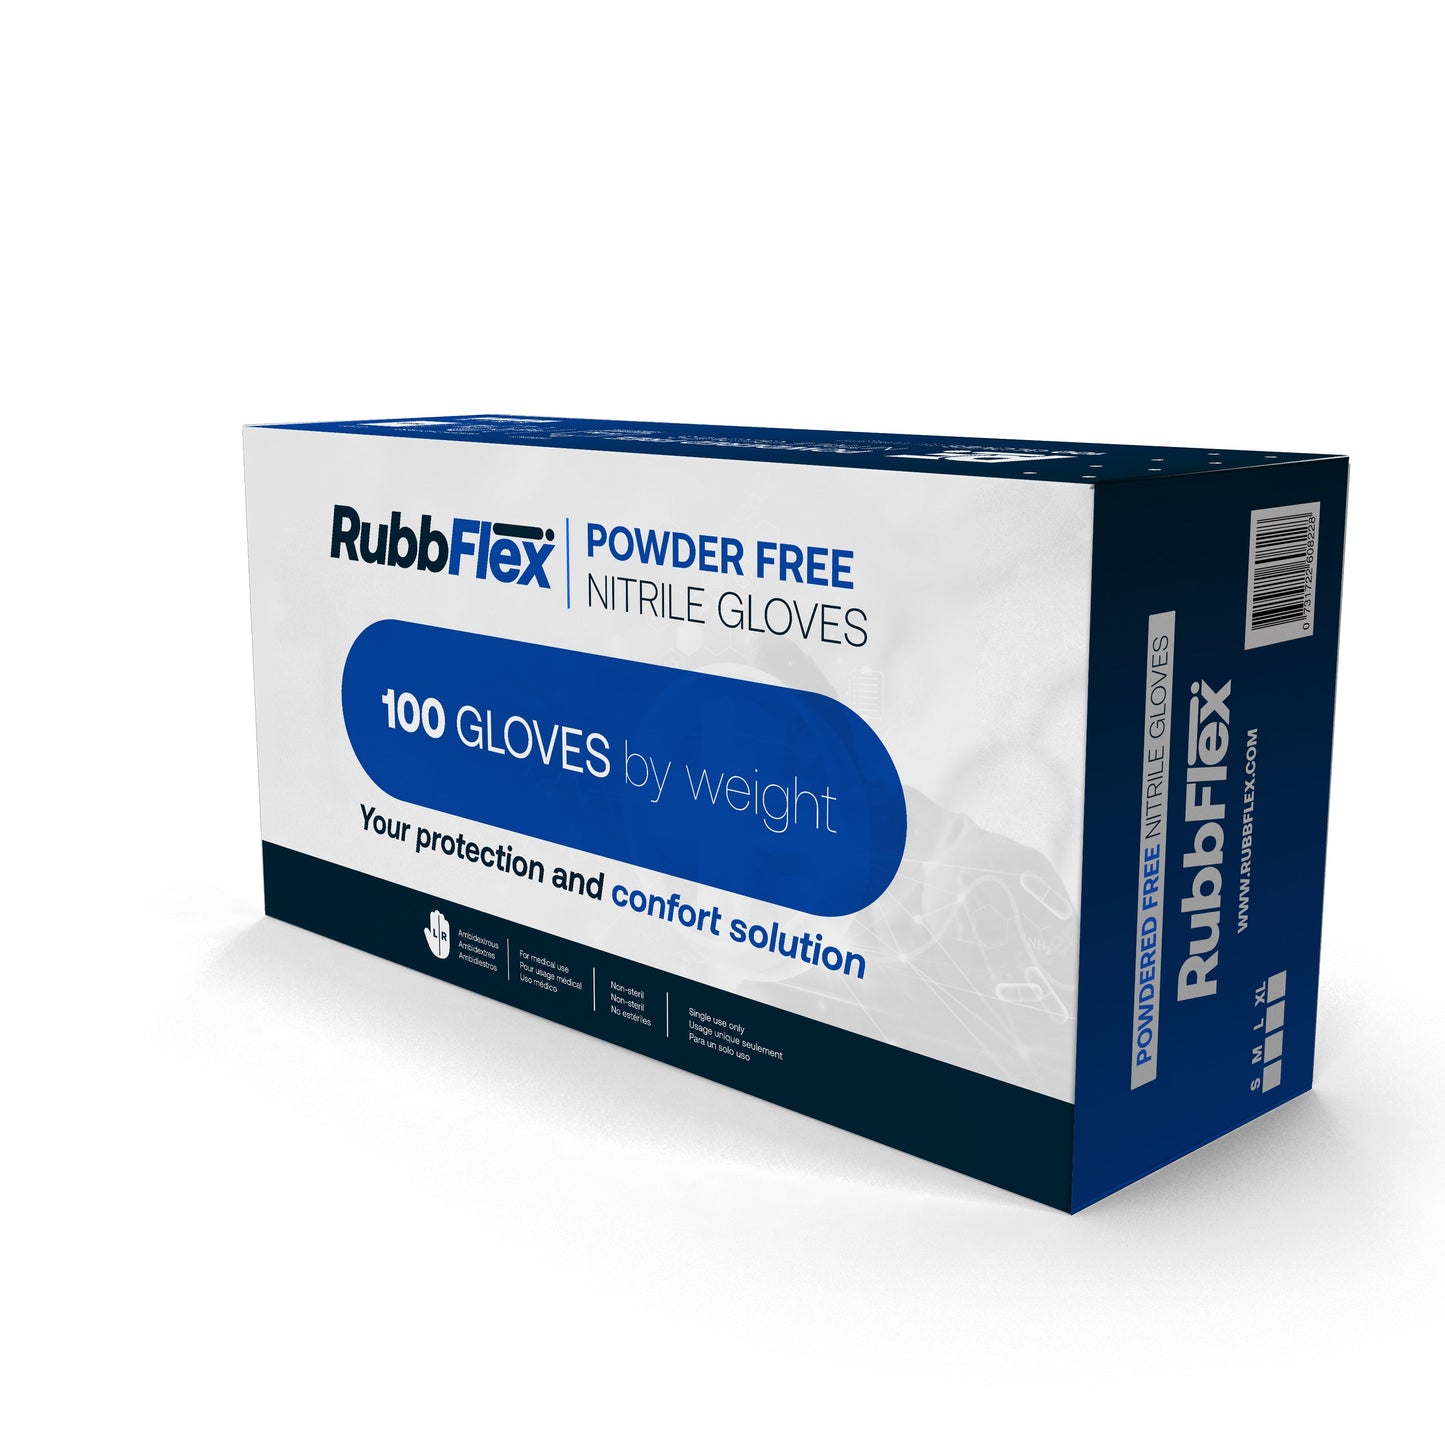 Rubbflex Nitrile Powder Free Disposable Gloves RNT100S - Medical Exam Grade - 3.1 mil Thick (Pack of 100) SMALL